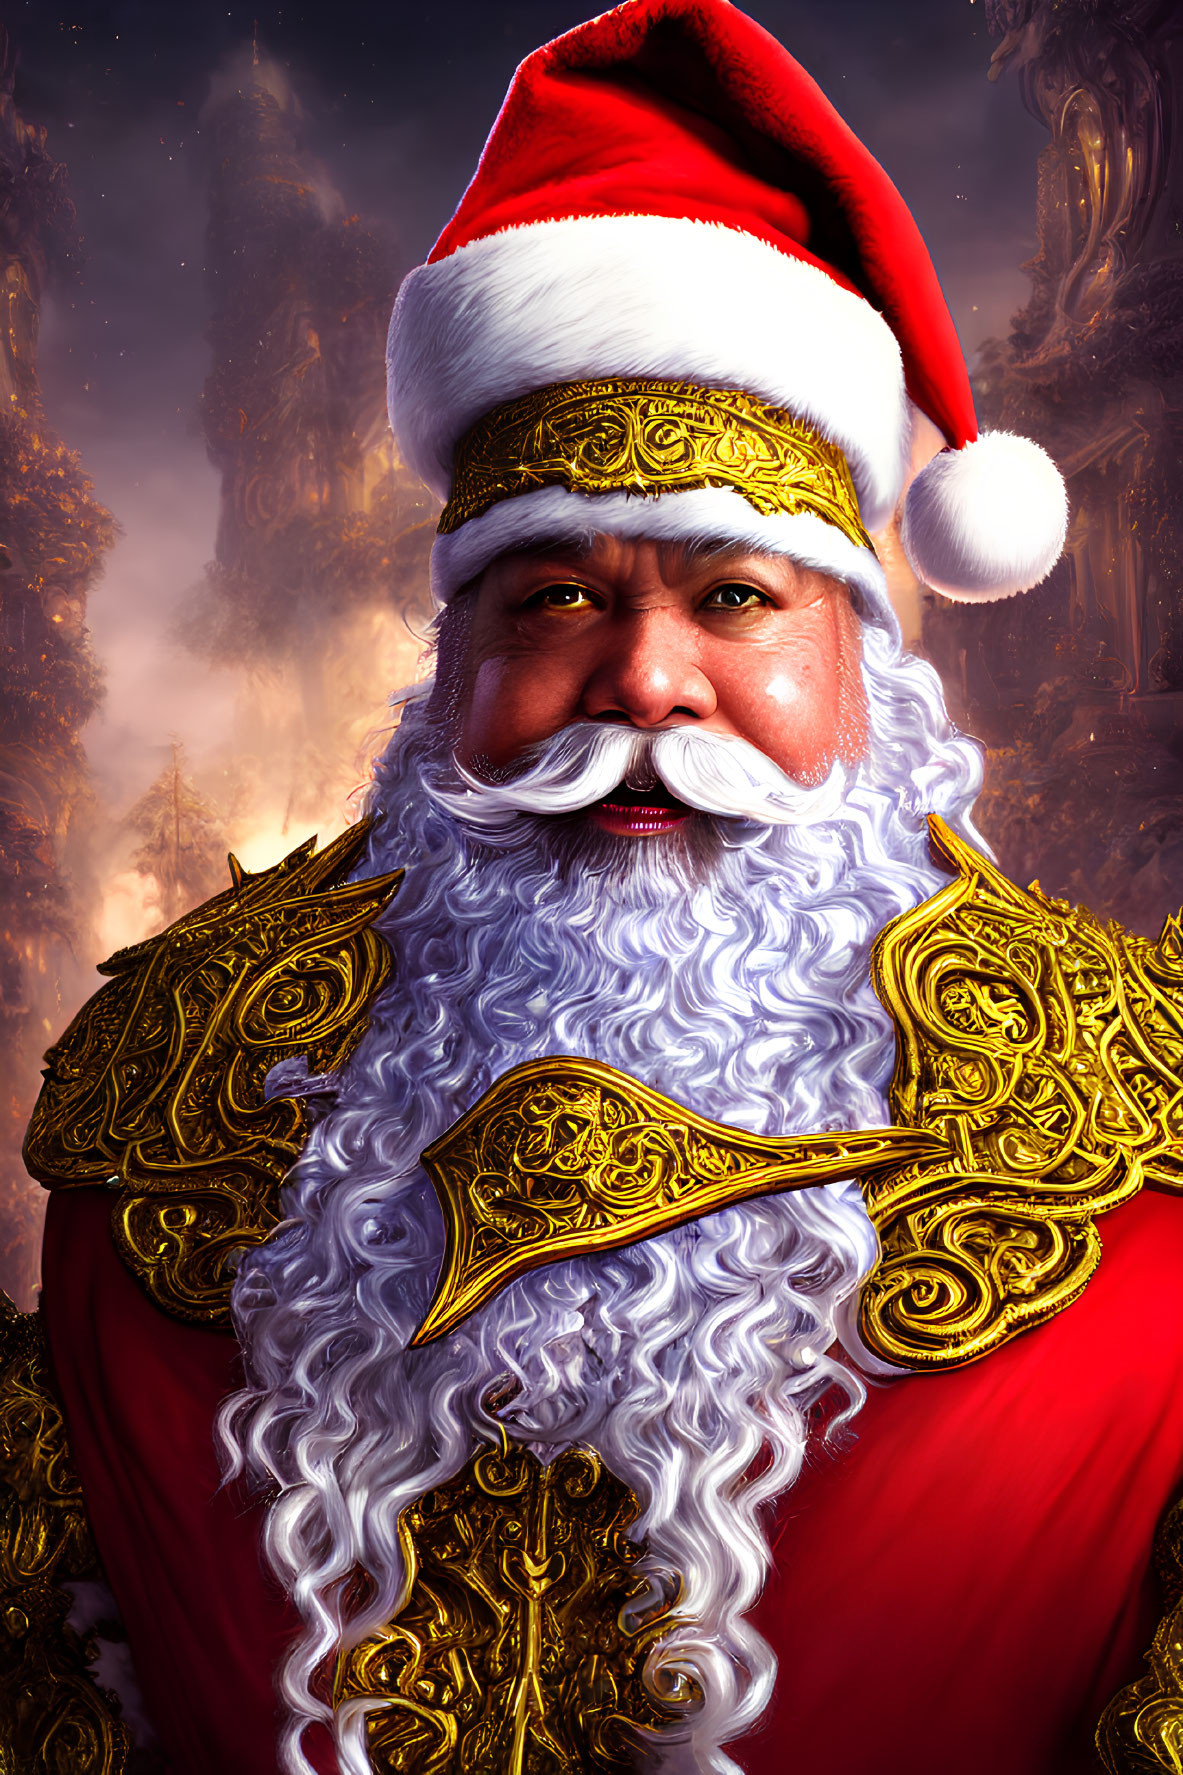 Detailed Santa Claus illustration in red and gold outfit with glowing backdrop